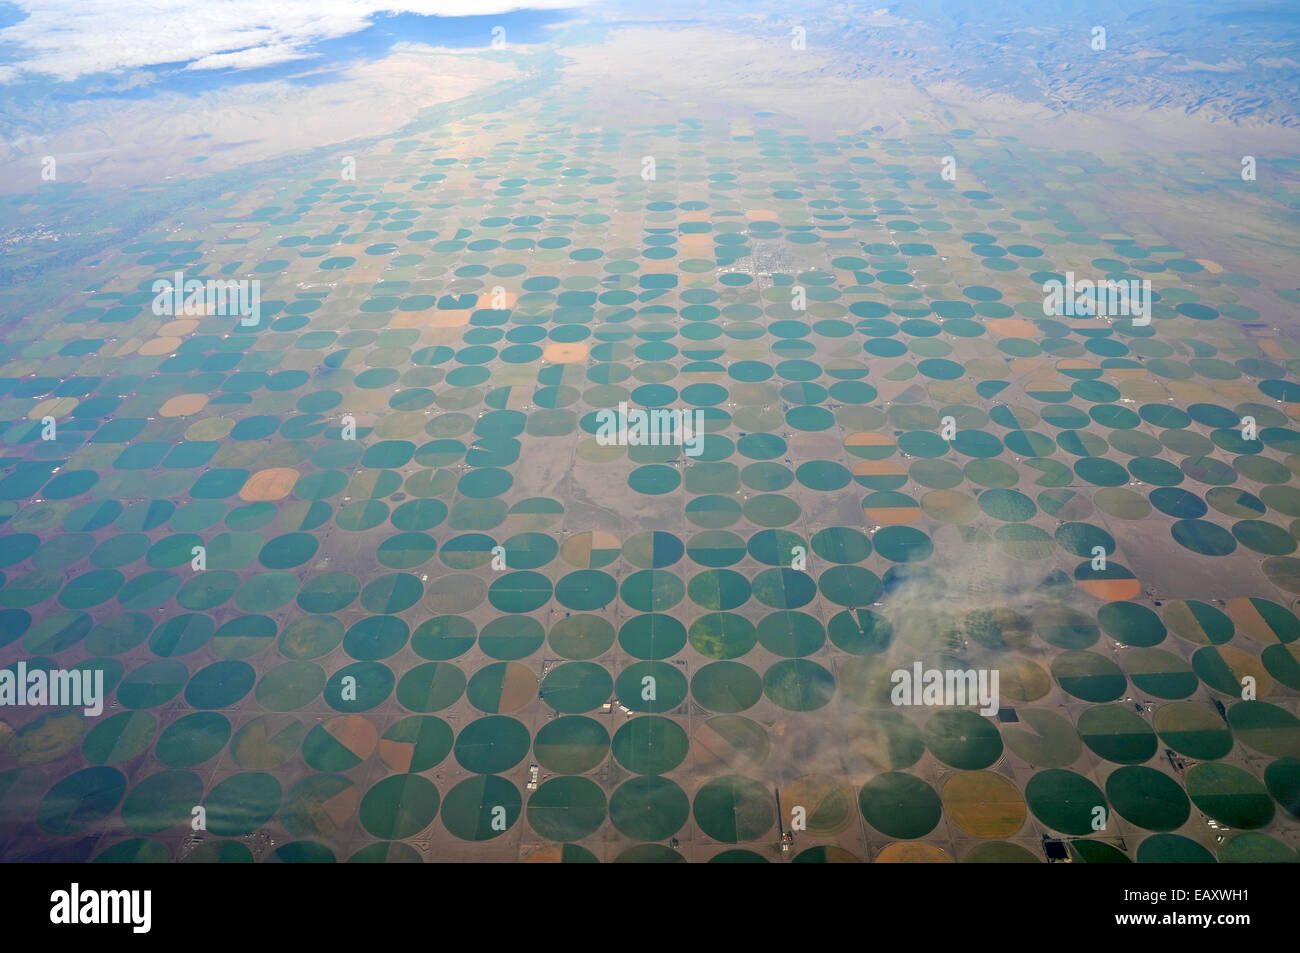 Vast round shaped fields in central USA Stock Photo